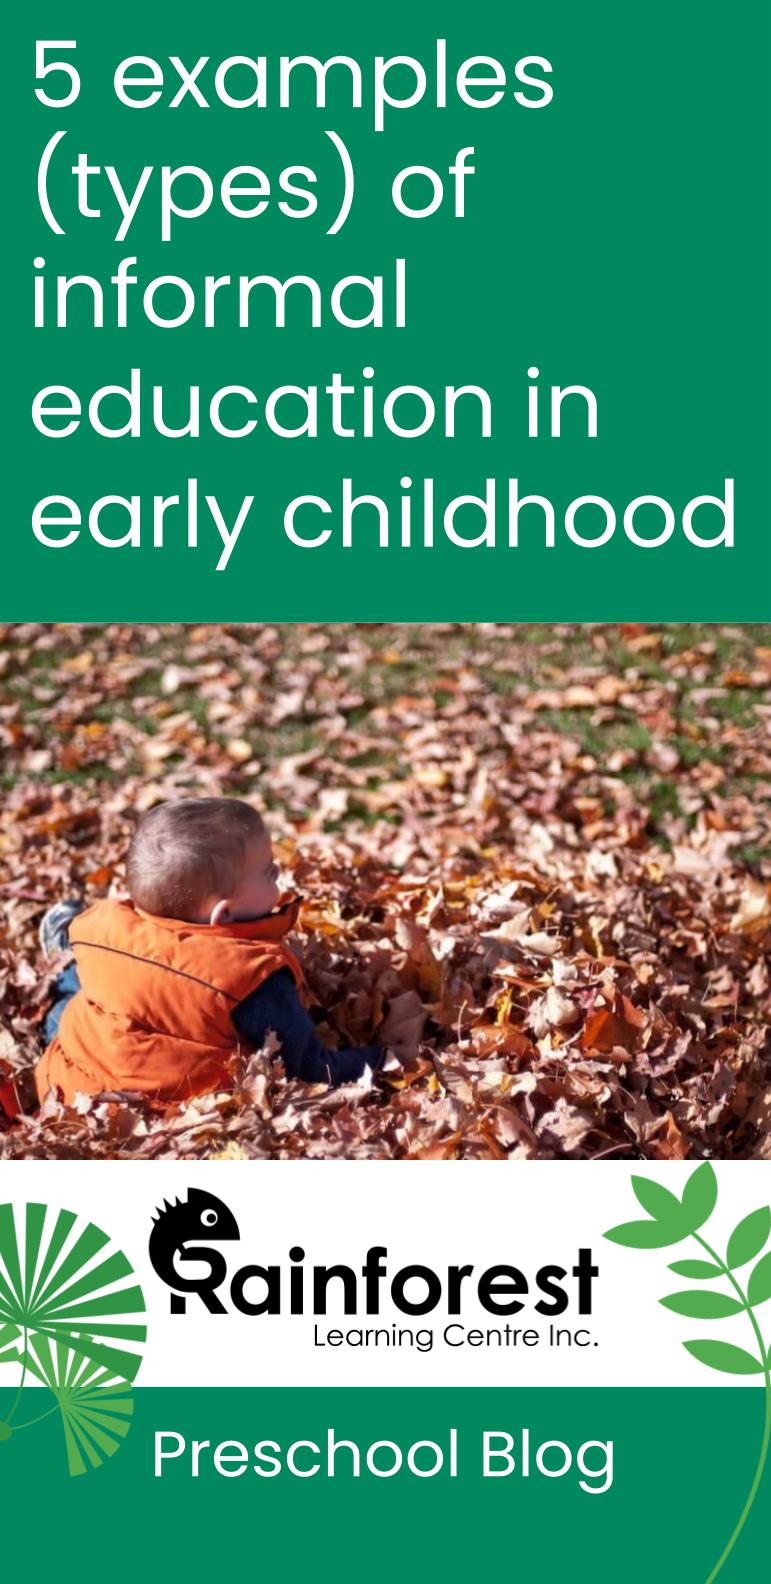 examples of informal education in early childhood - blog pinterest image